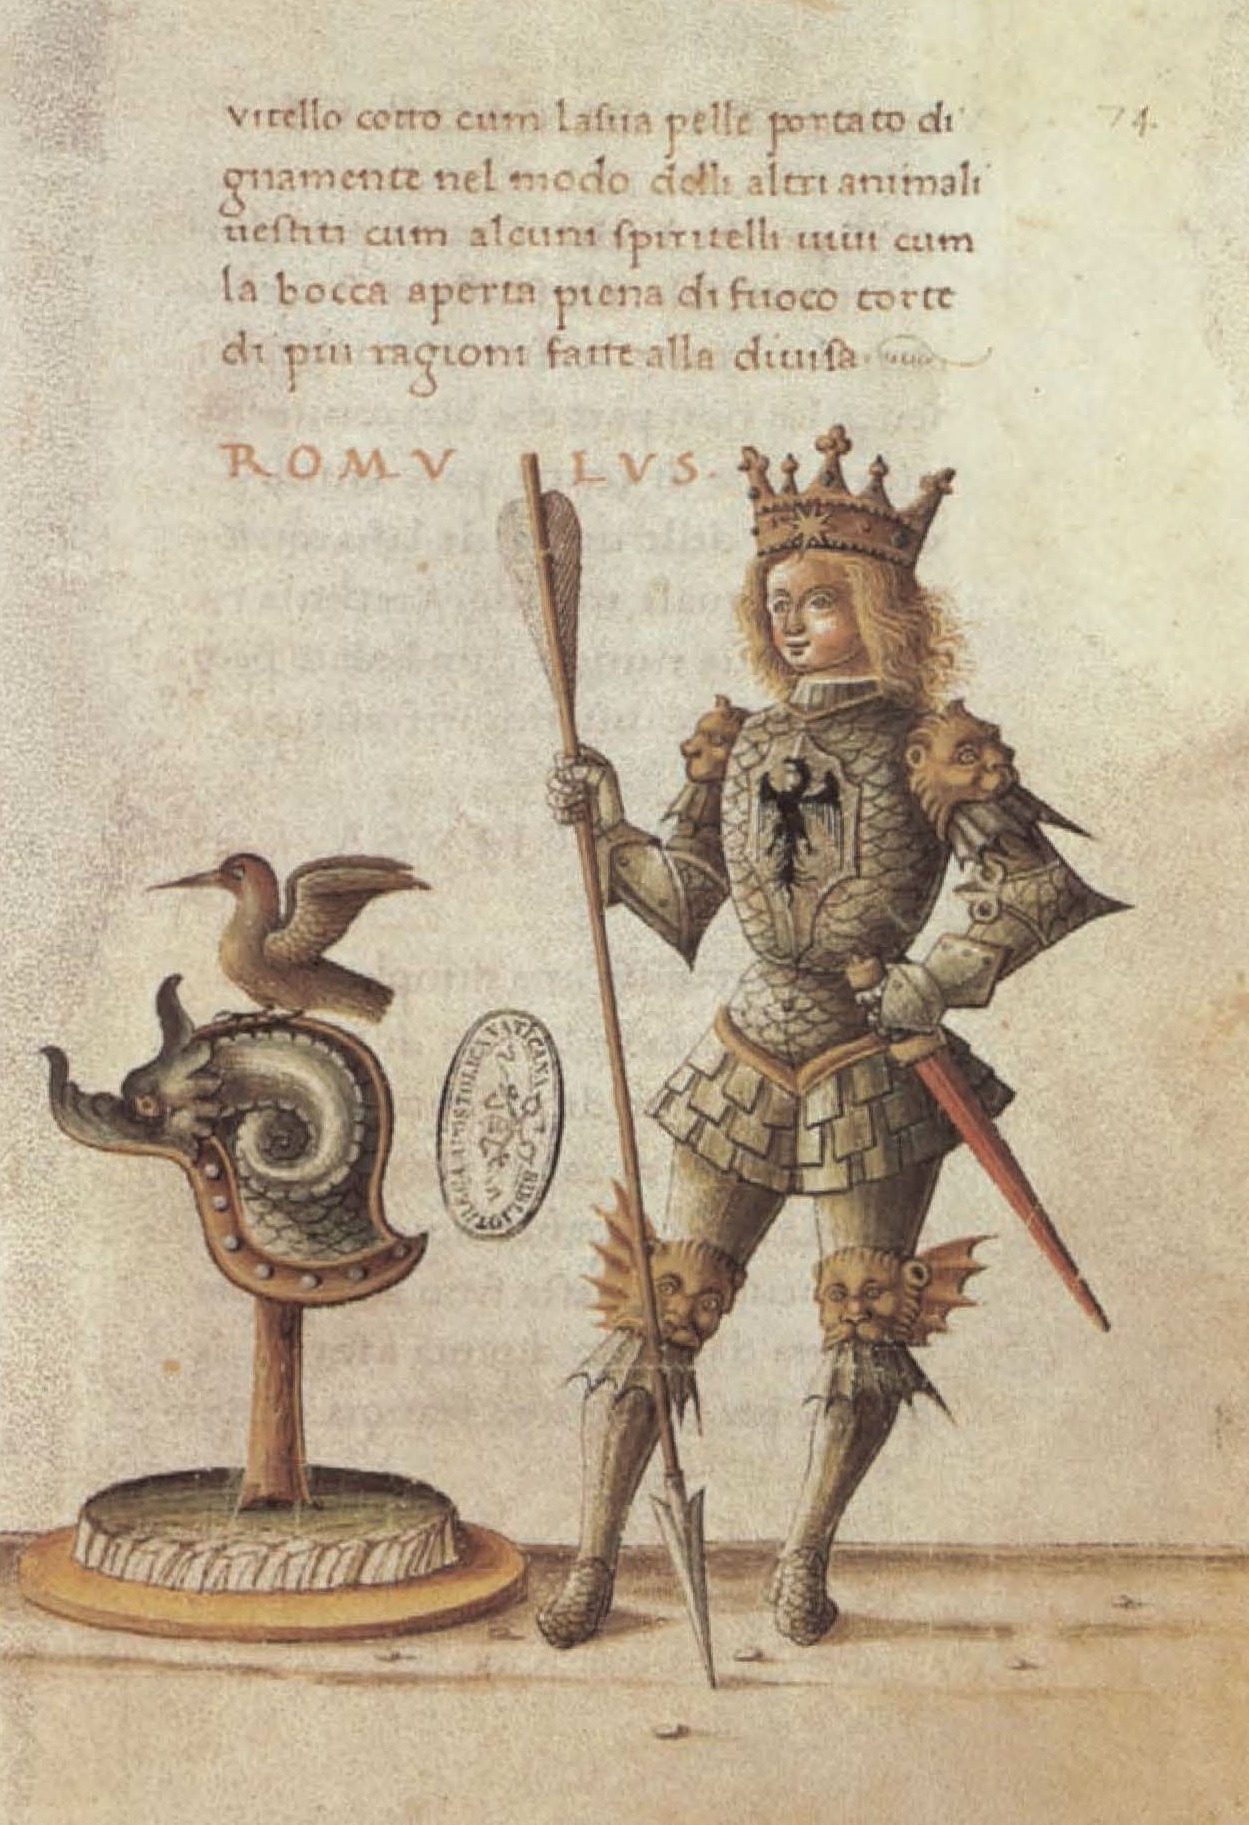 Romulus, the legendary founder of Rome, dressed in armor more contemporary to the late 15th century artist.
(Biblioteca Apostolica Vaticana)